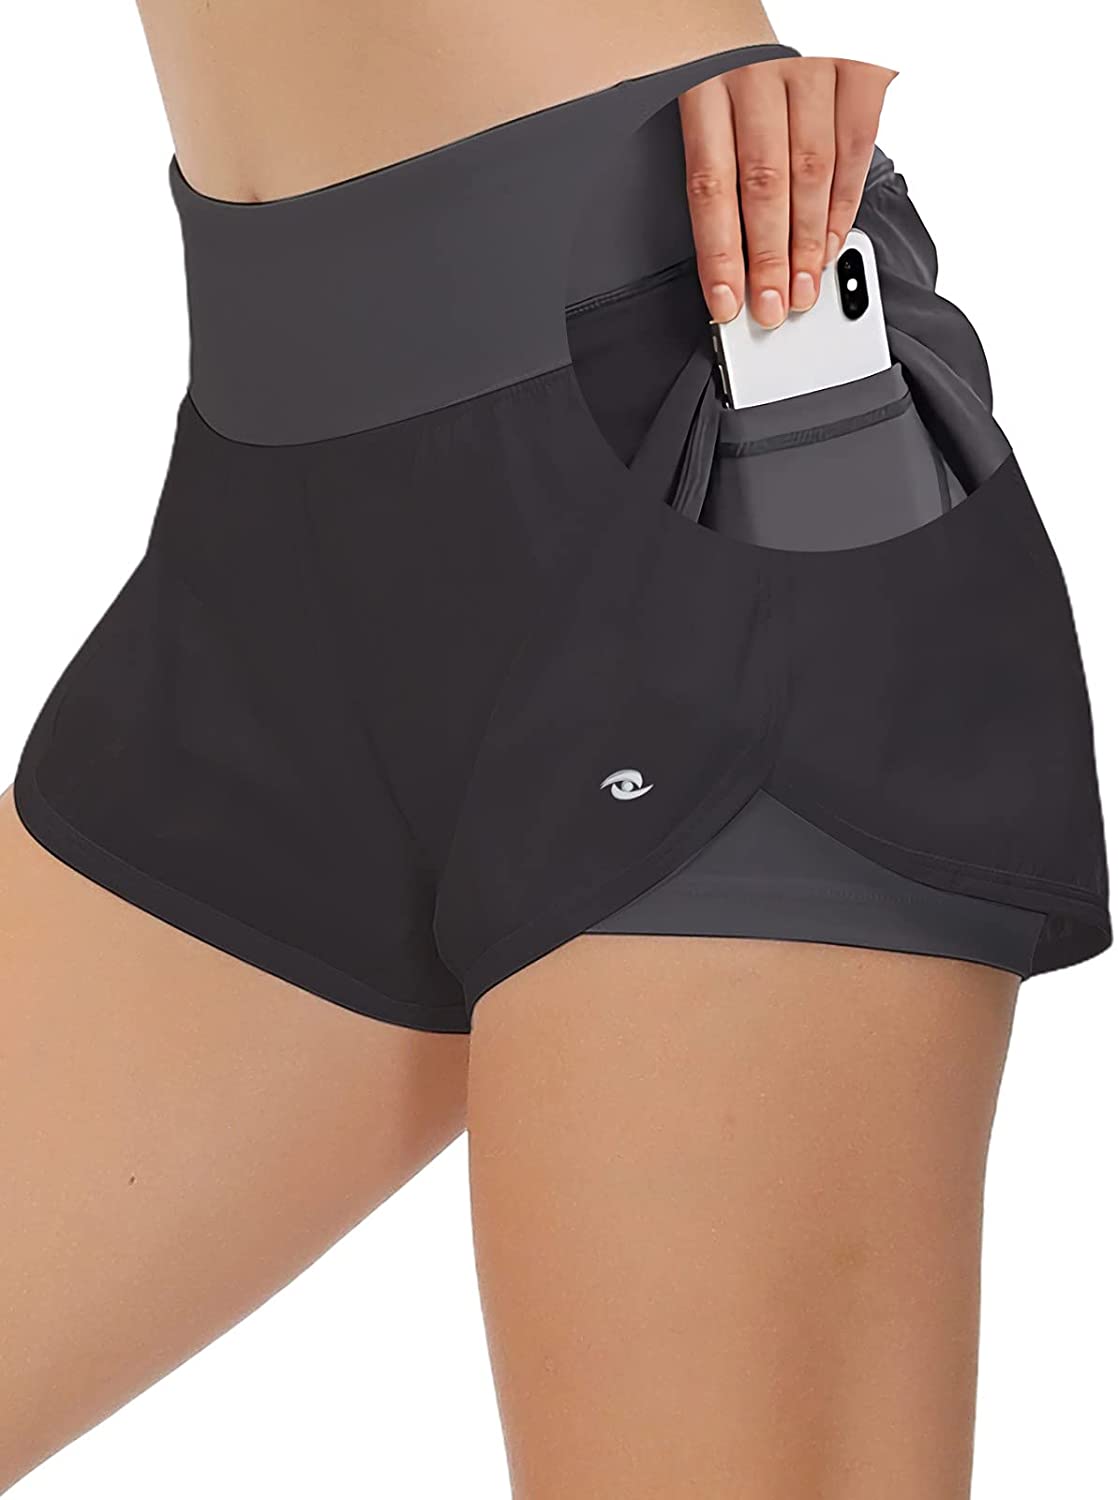 Eyesoul Womens Workout Shorts with Liner Pocket Double Layer Athletic Running Yoga Shorts with Back Pockets